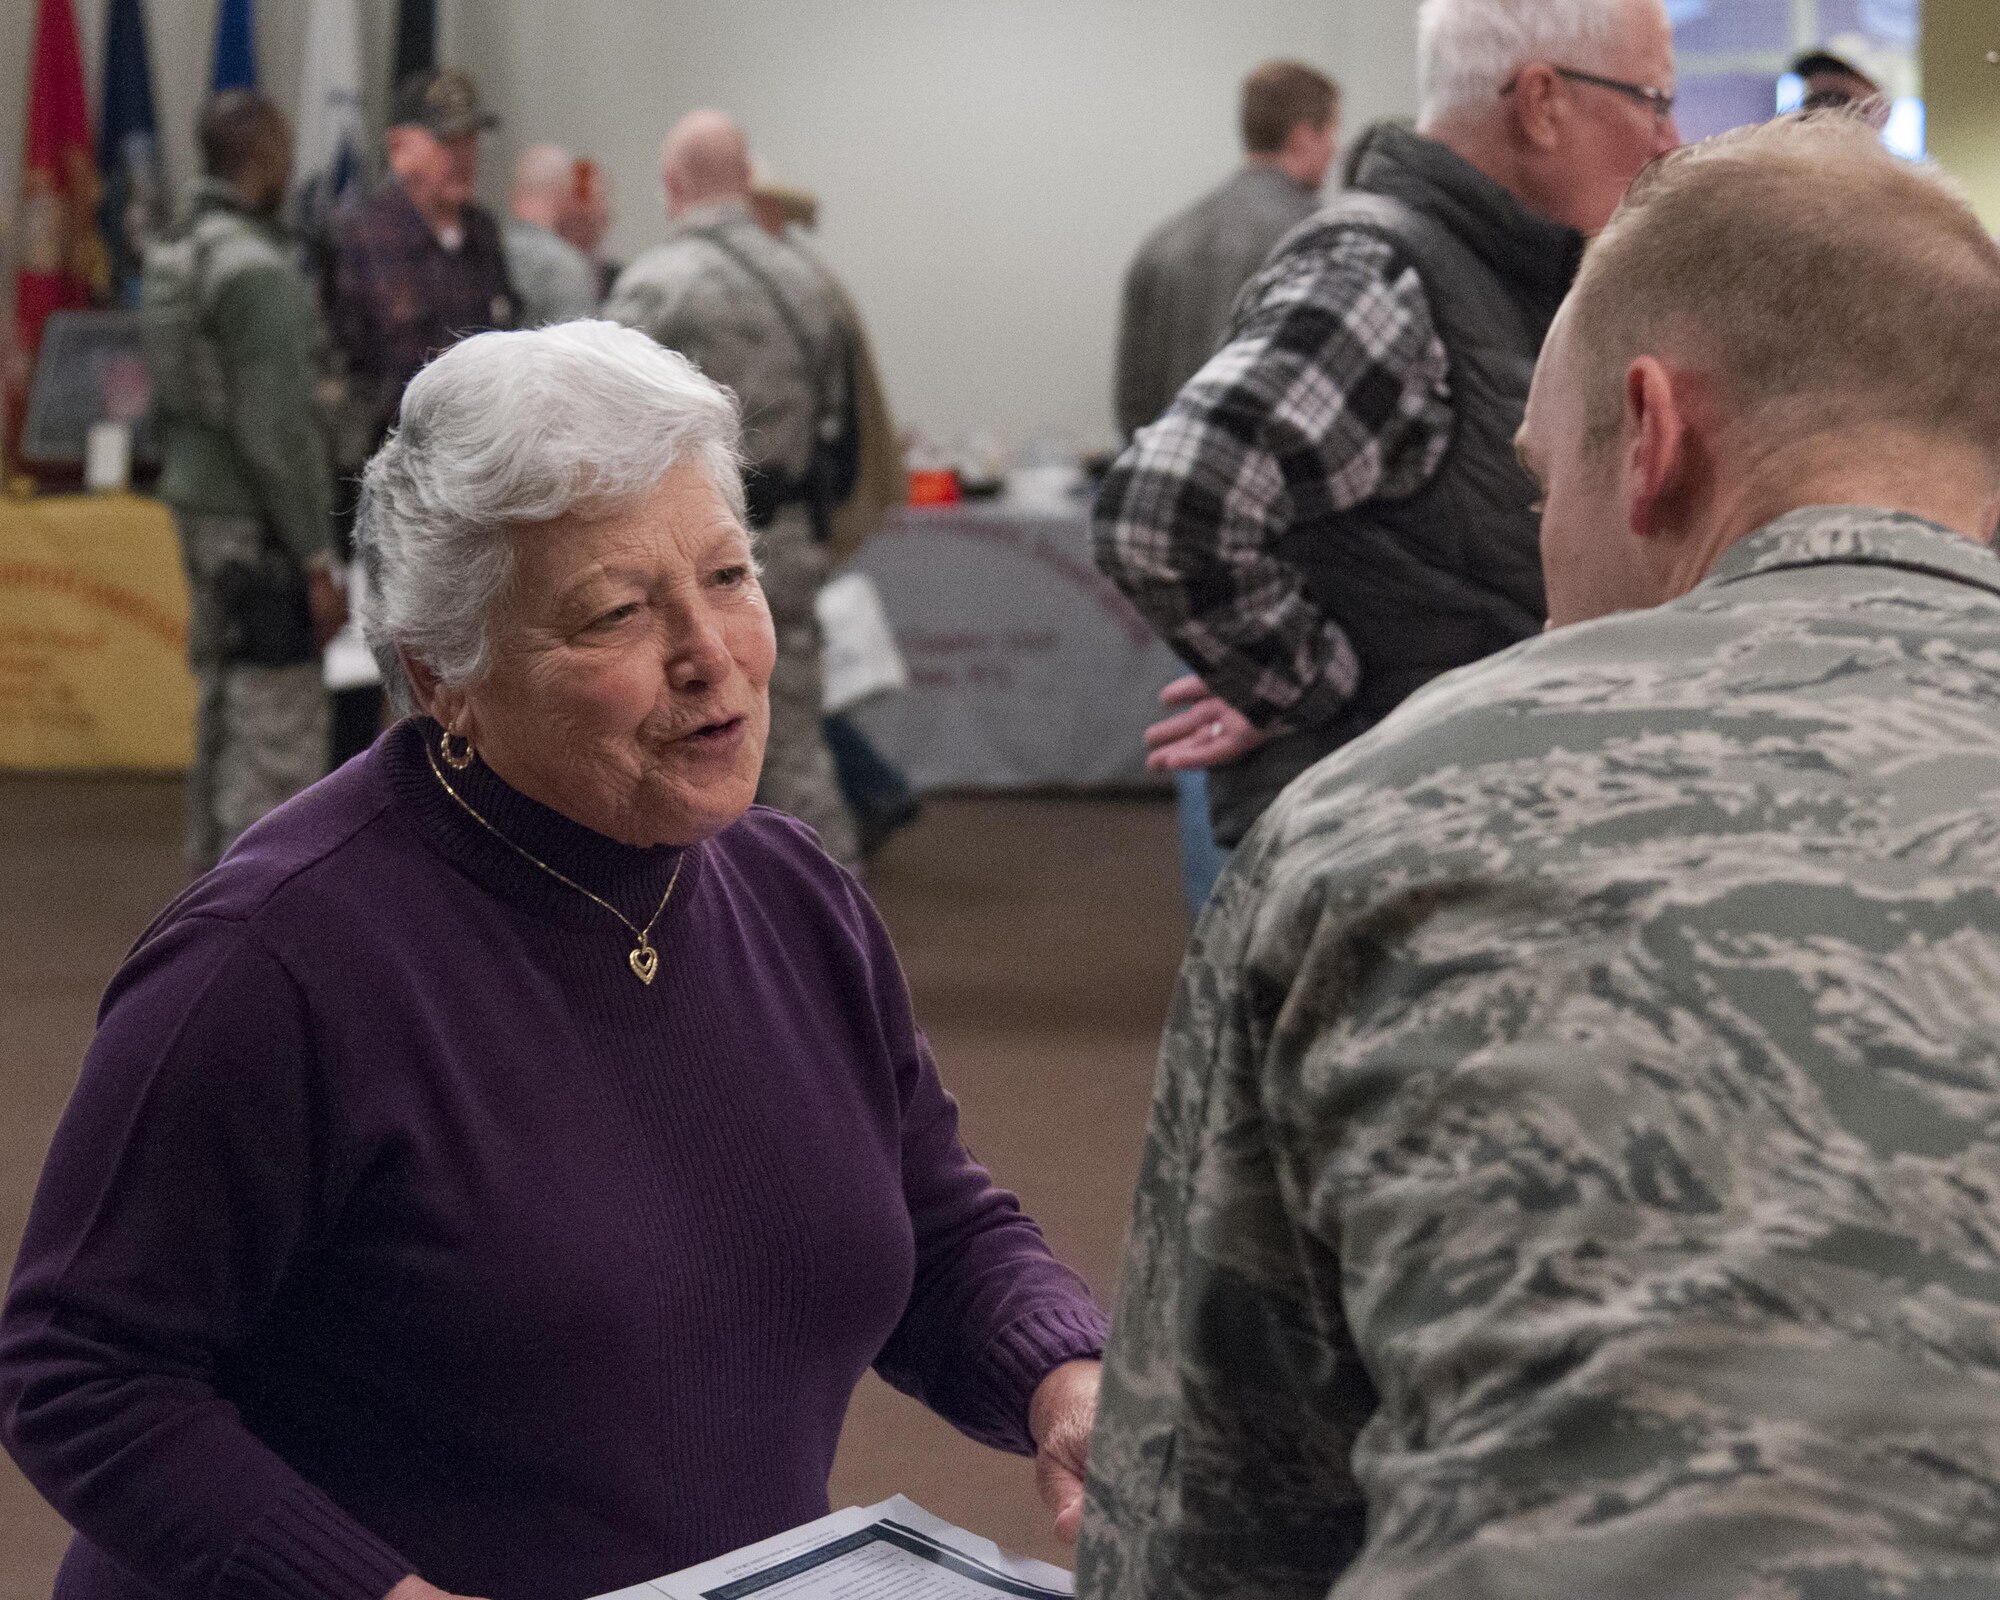 Idalina Barajas, wife of retired Master Sgt. Joe Barajas, talks with Chaplain (Capt.) Samuel McClellan, 90th Missile Wing chaplain, during Retiree Appreciation Day on F.E. Warren Air Force Base, Wyo., April 30, 2016. Barajas had questions about chapel services on base. (U.S. Air Force photo by Senior Airman Jason Wiese)